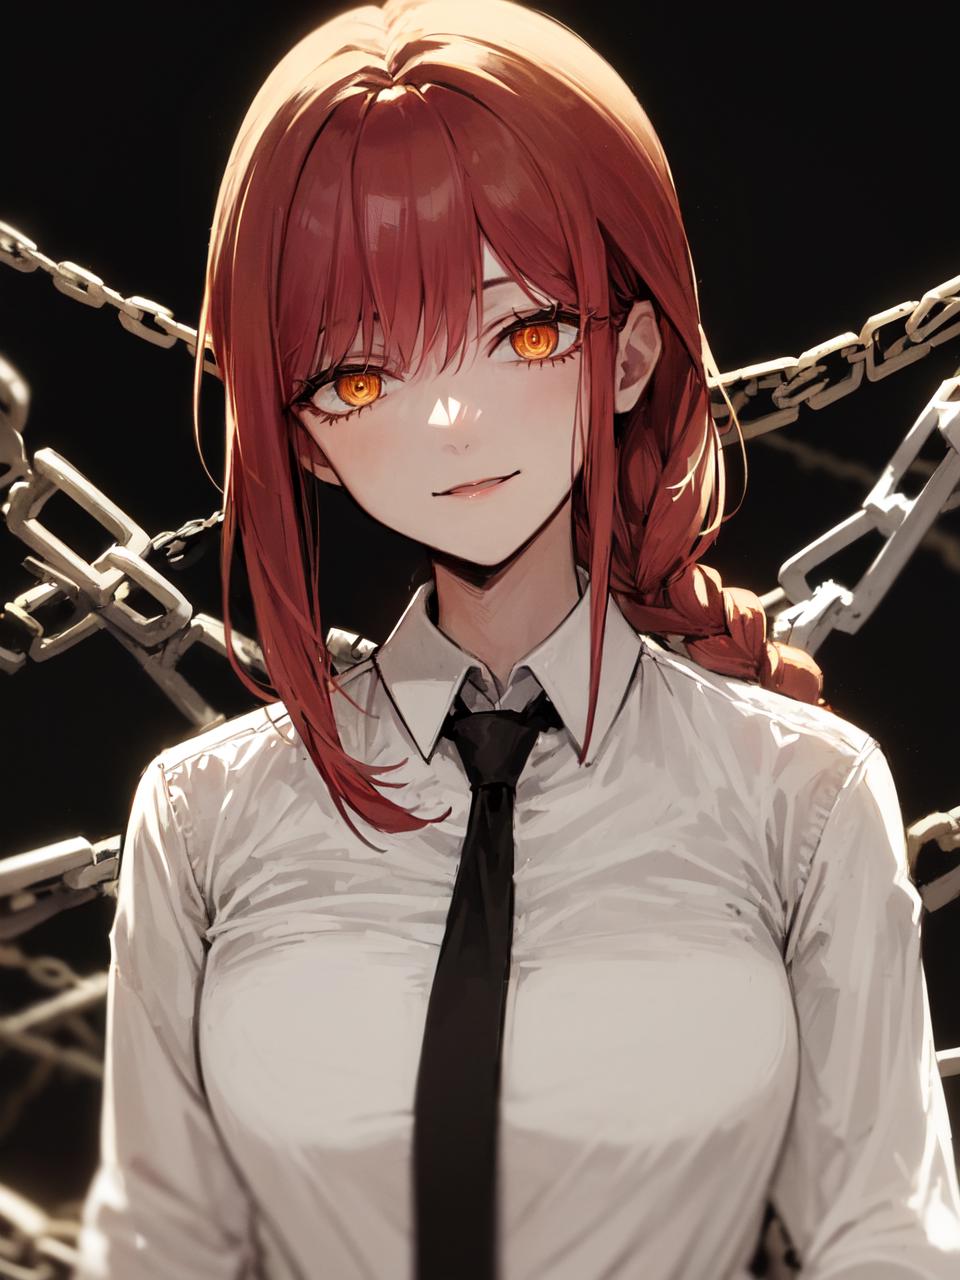 A woman in a white shirt with a black tie and red hair.